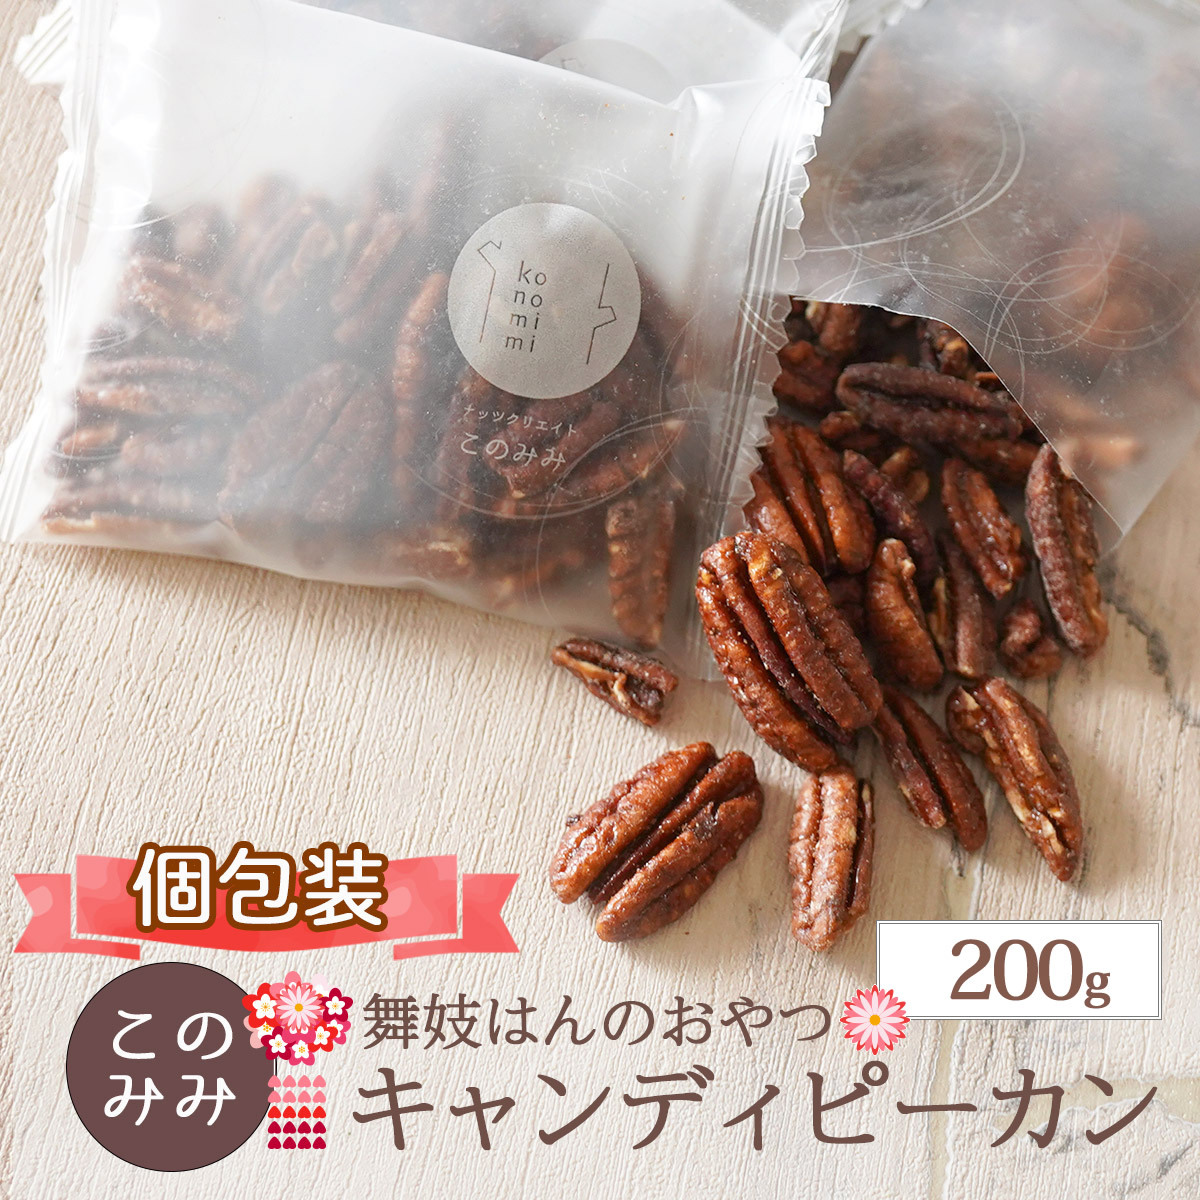  candy pi- can nuts 200g piece packing small amount . walnut pe can nuts sweets .. candy - snack candy pi- can 